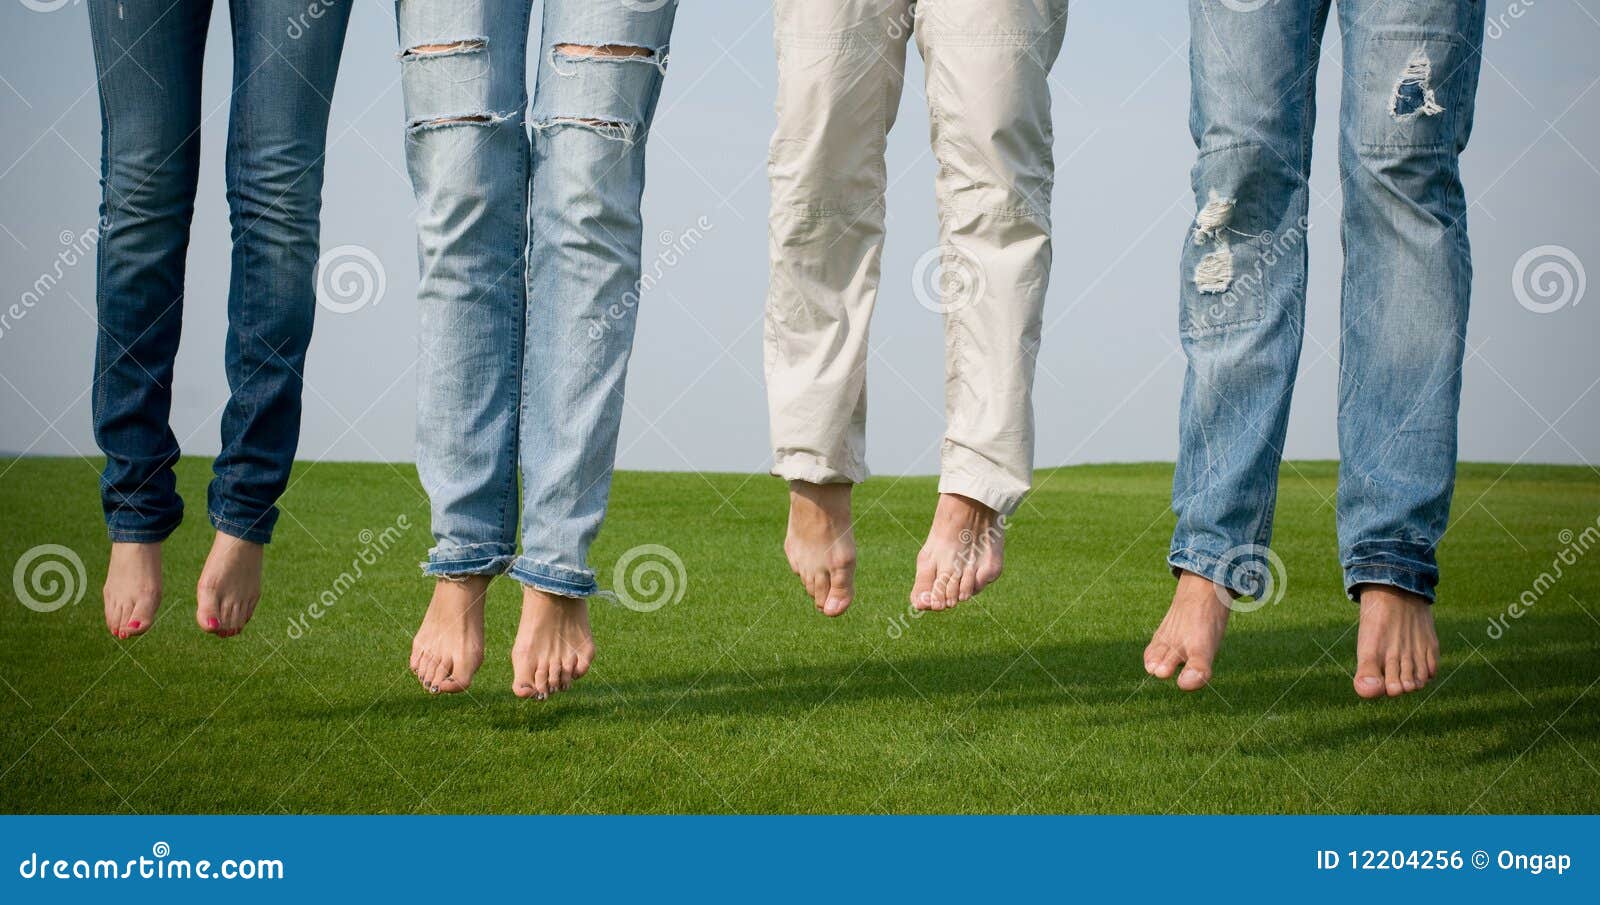 people with jeans